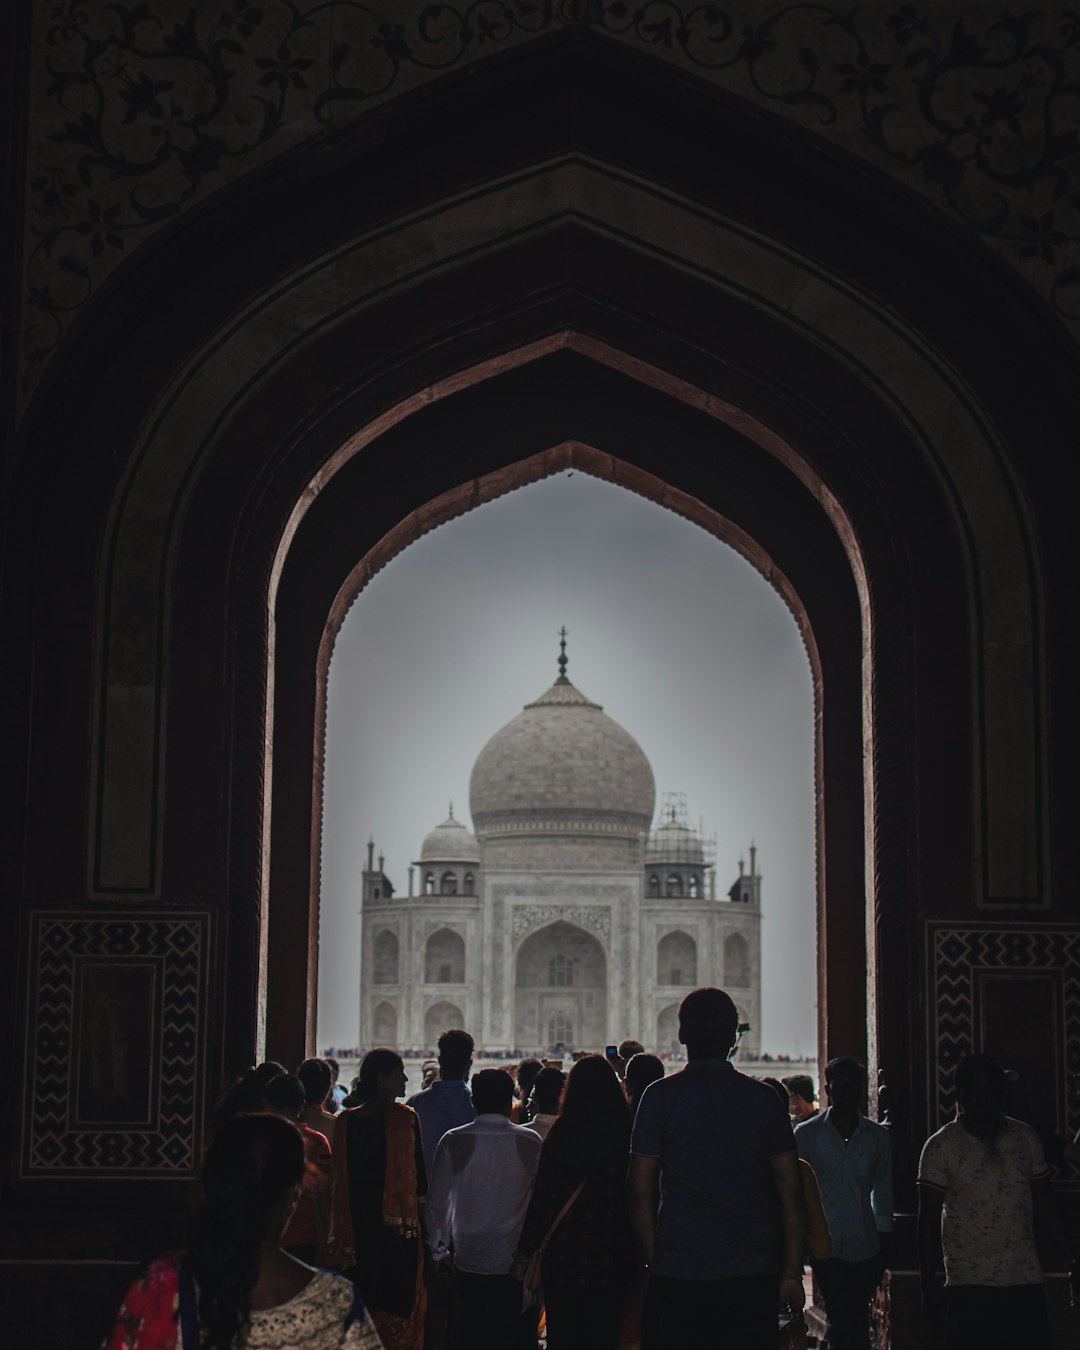 travelers stories about Landmark in Agra, India